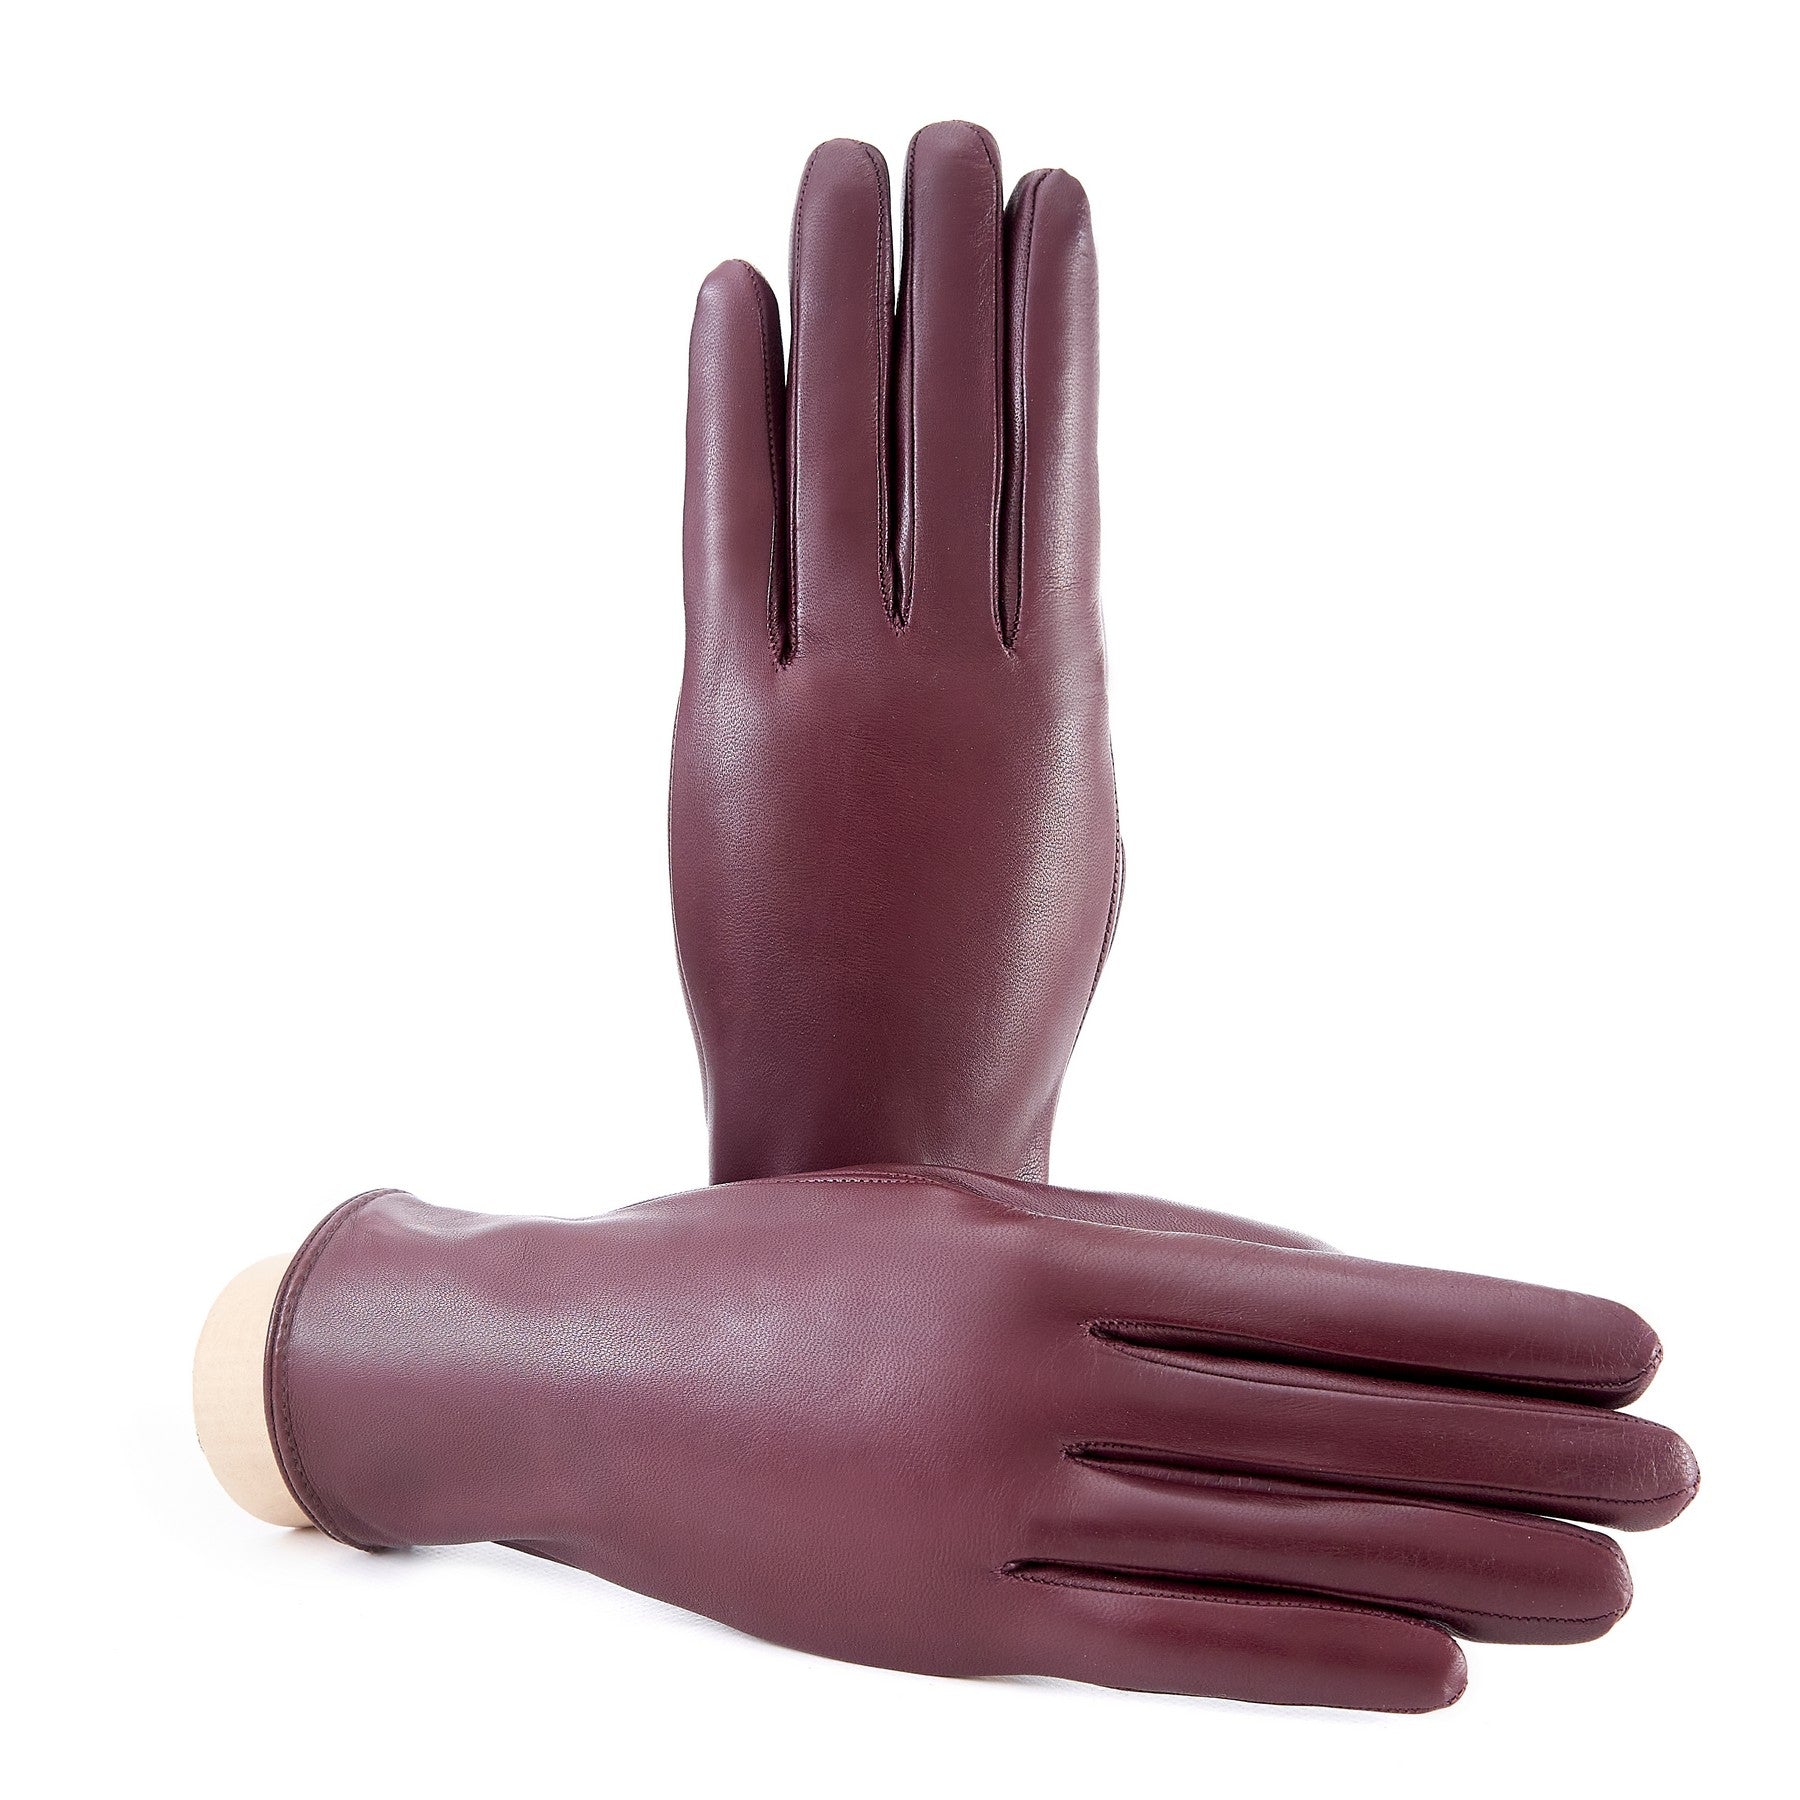 Women’s basic bordeaux soft nappa leather gloves with palm opening and mix cashmere lining